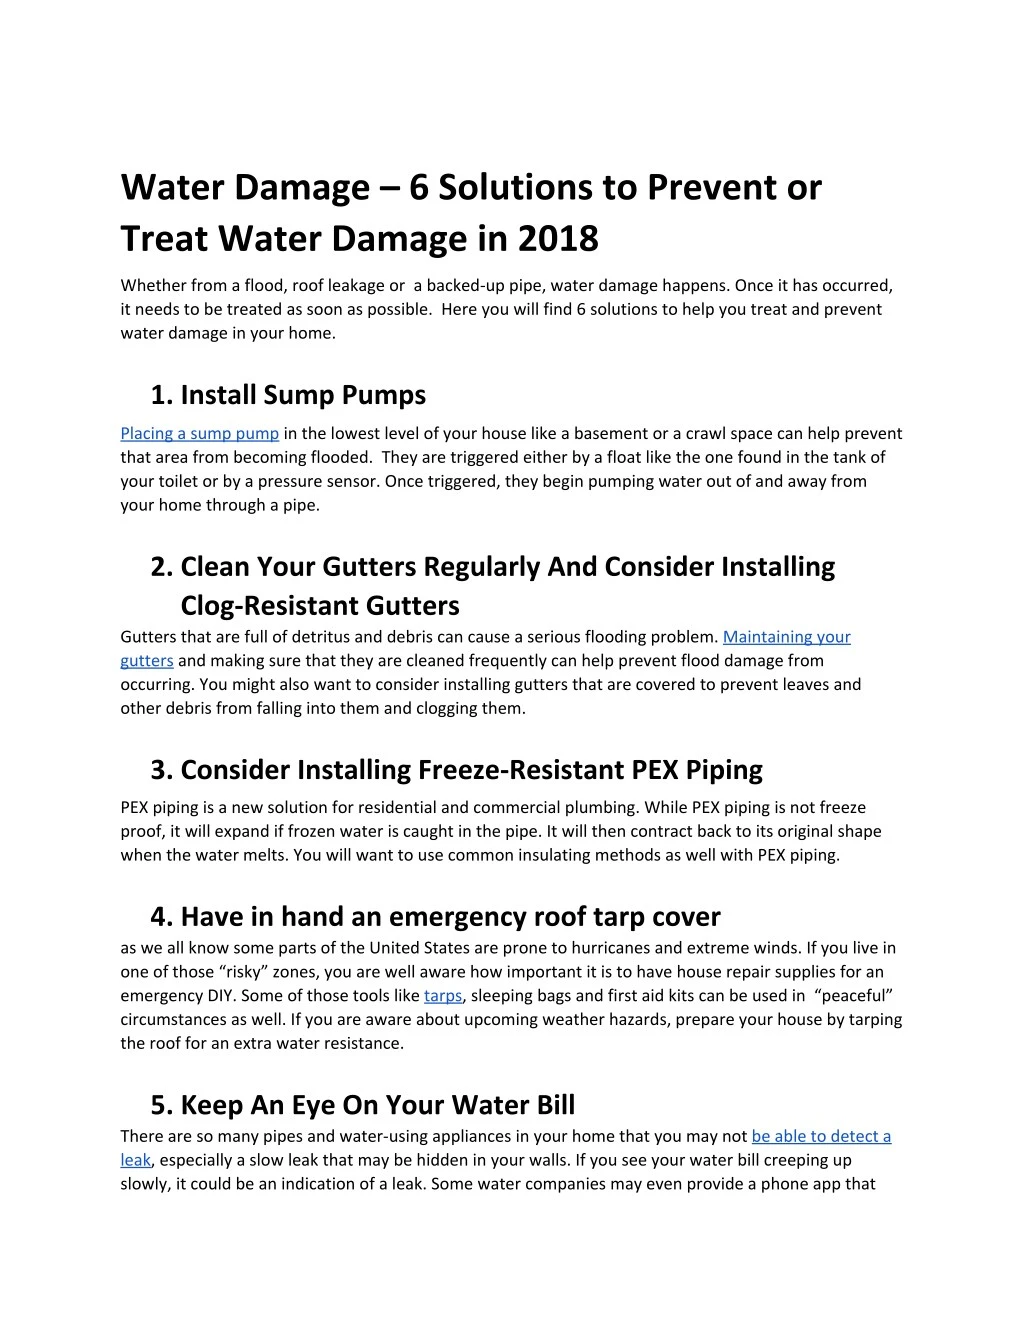 water damage 6 solutions to prevent or treat